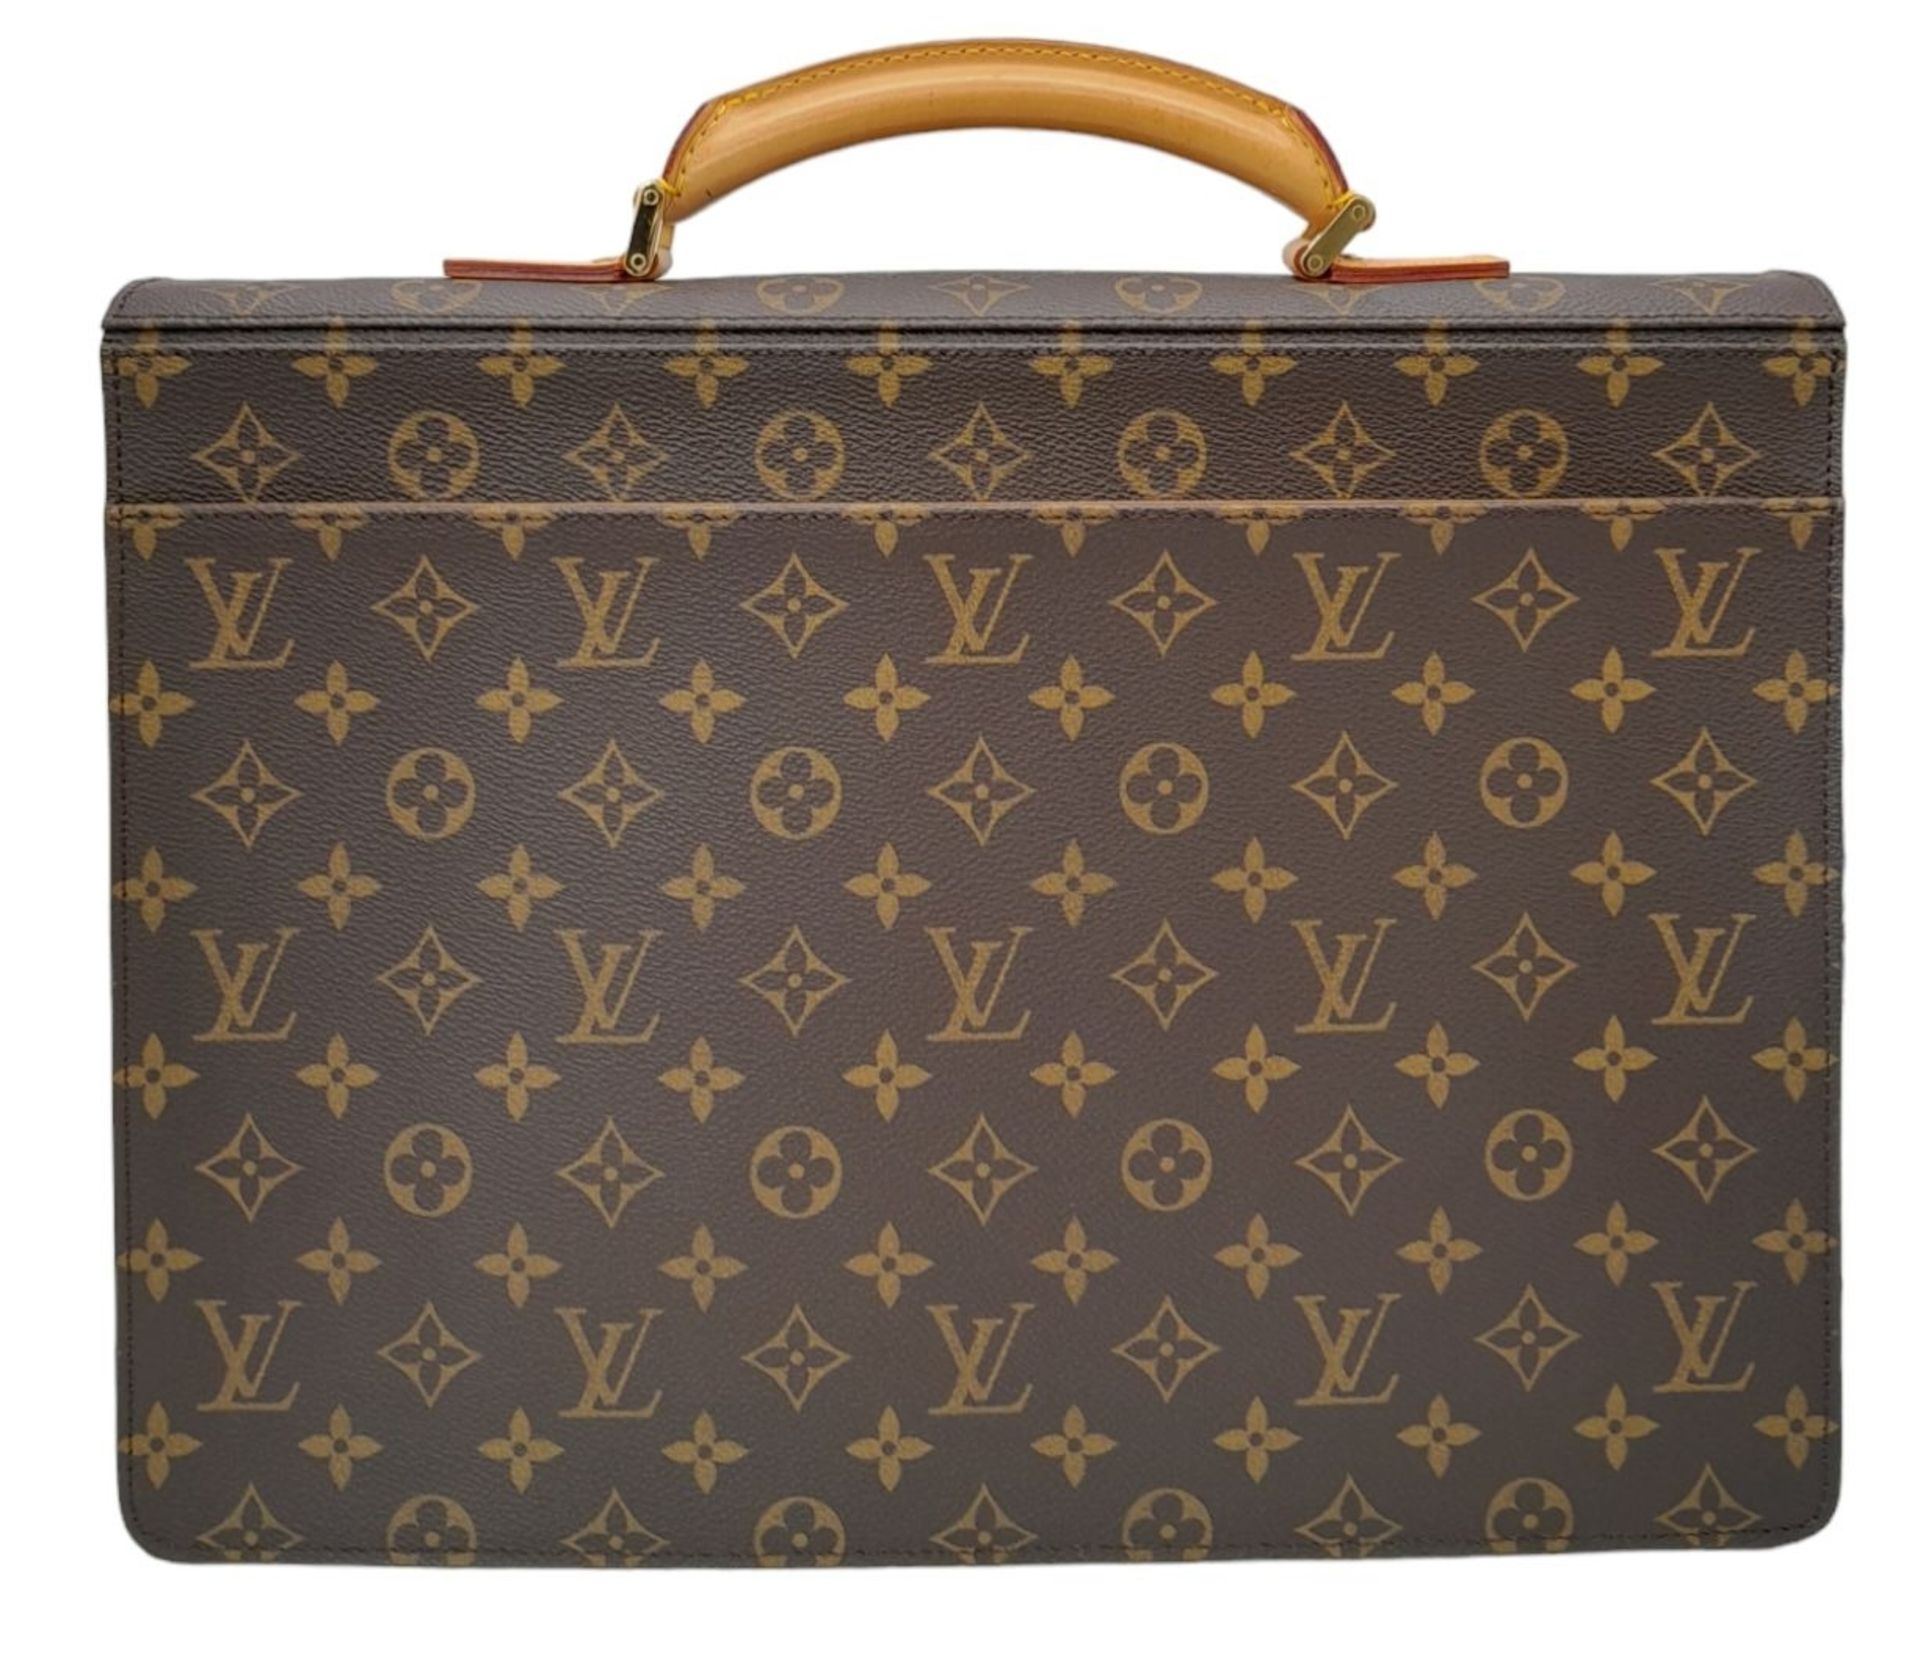 AN IMMACULATE LOUIS VUITTON CLASSIC BRIEF CASE IN UNUSED CONDITION WITH ORIGINAL DUST COVER . 38 X - Image 2 of 10